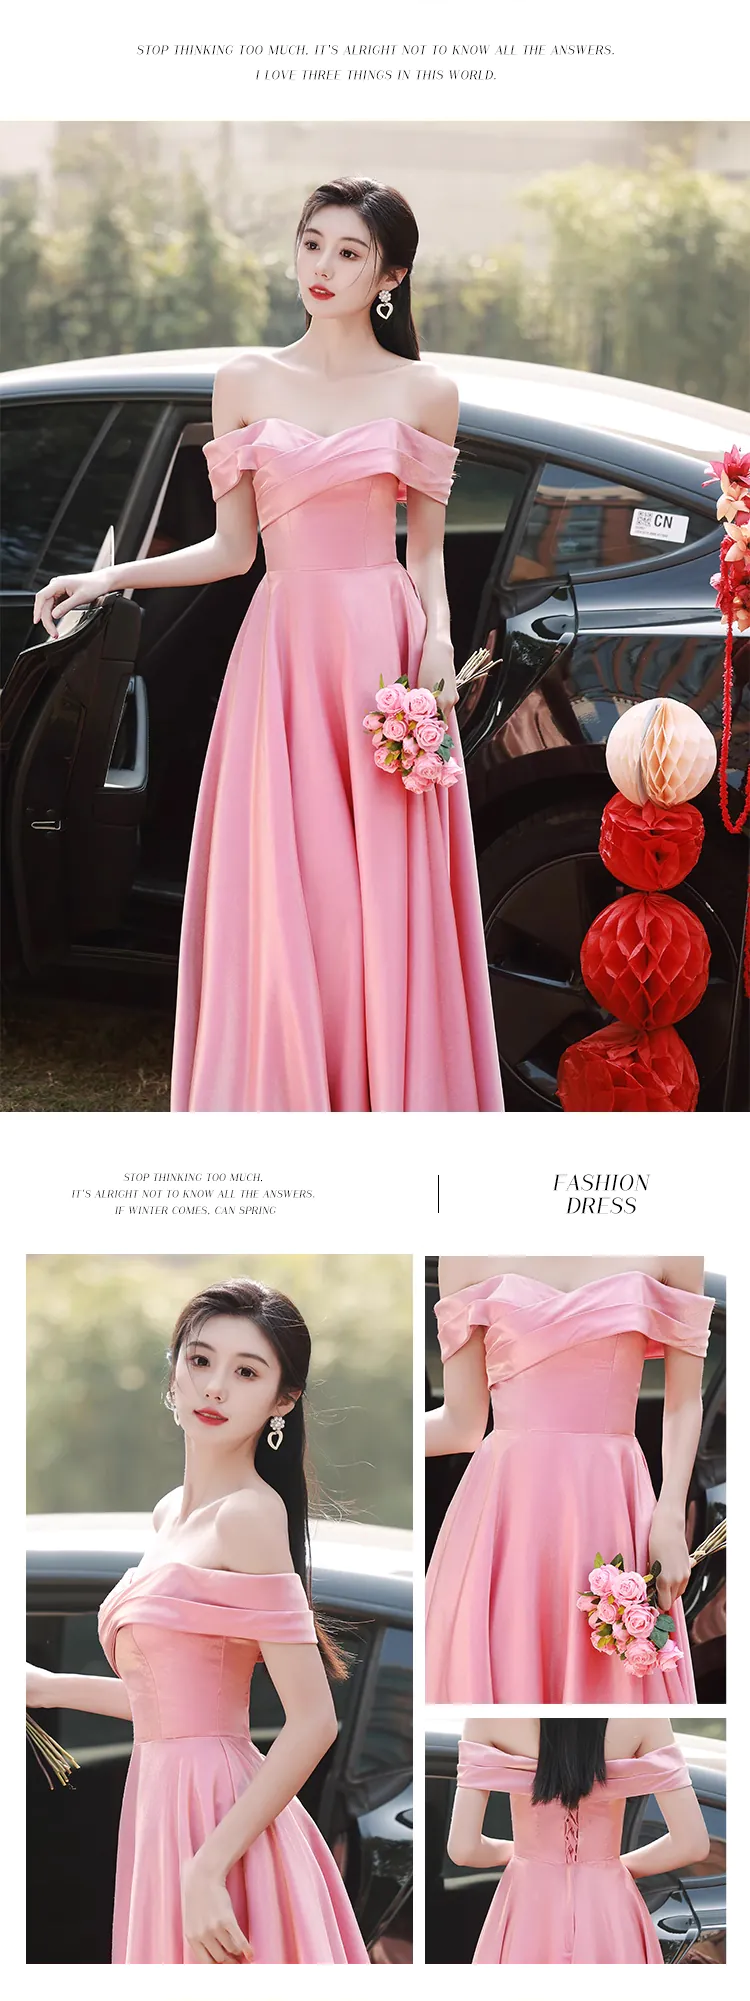 Charming-Pink-Satin-Bridesmaid-Dress-Short-Sleeve-Prom-Evening-Gown25